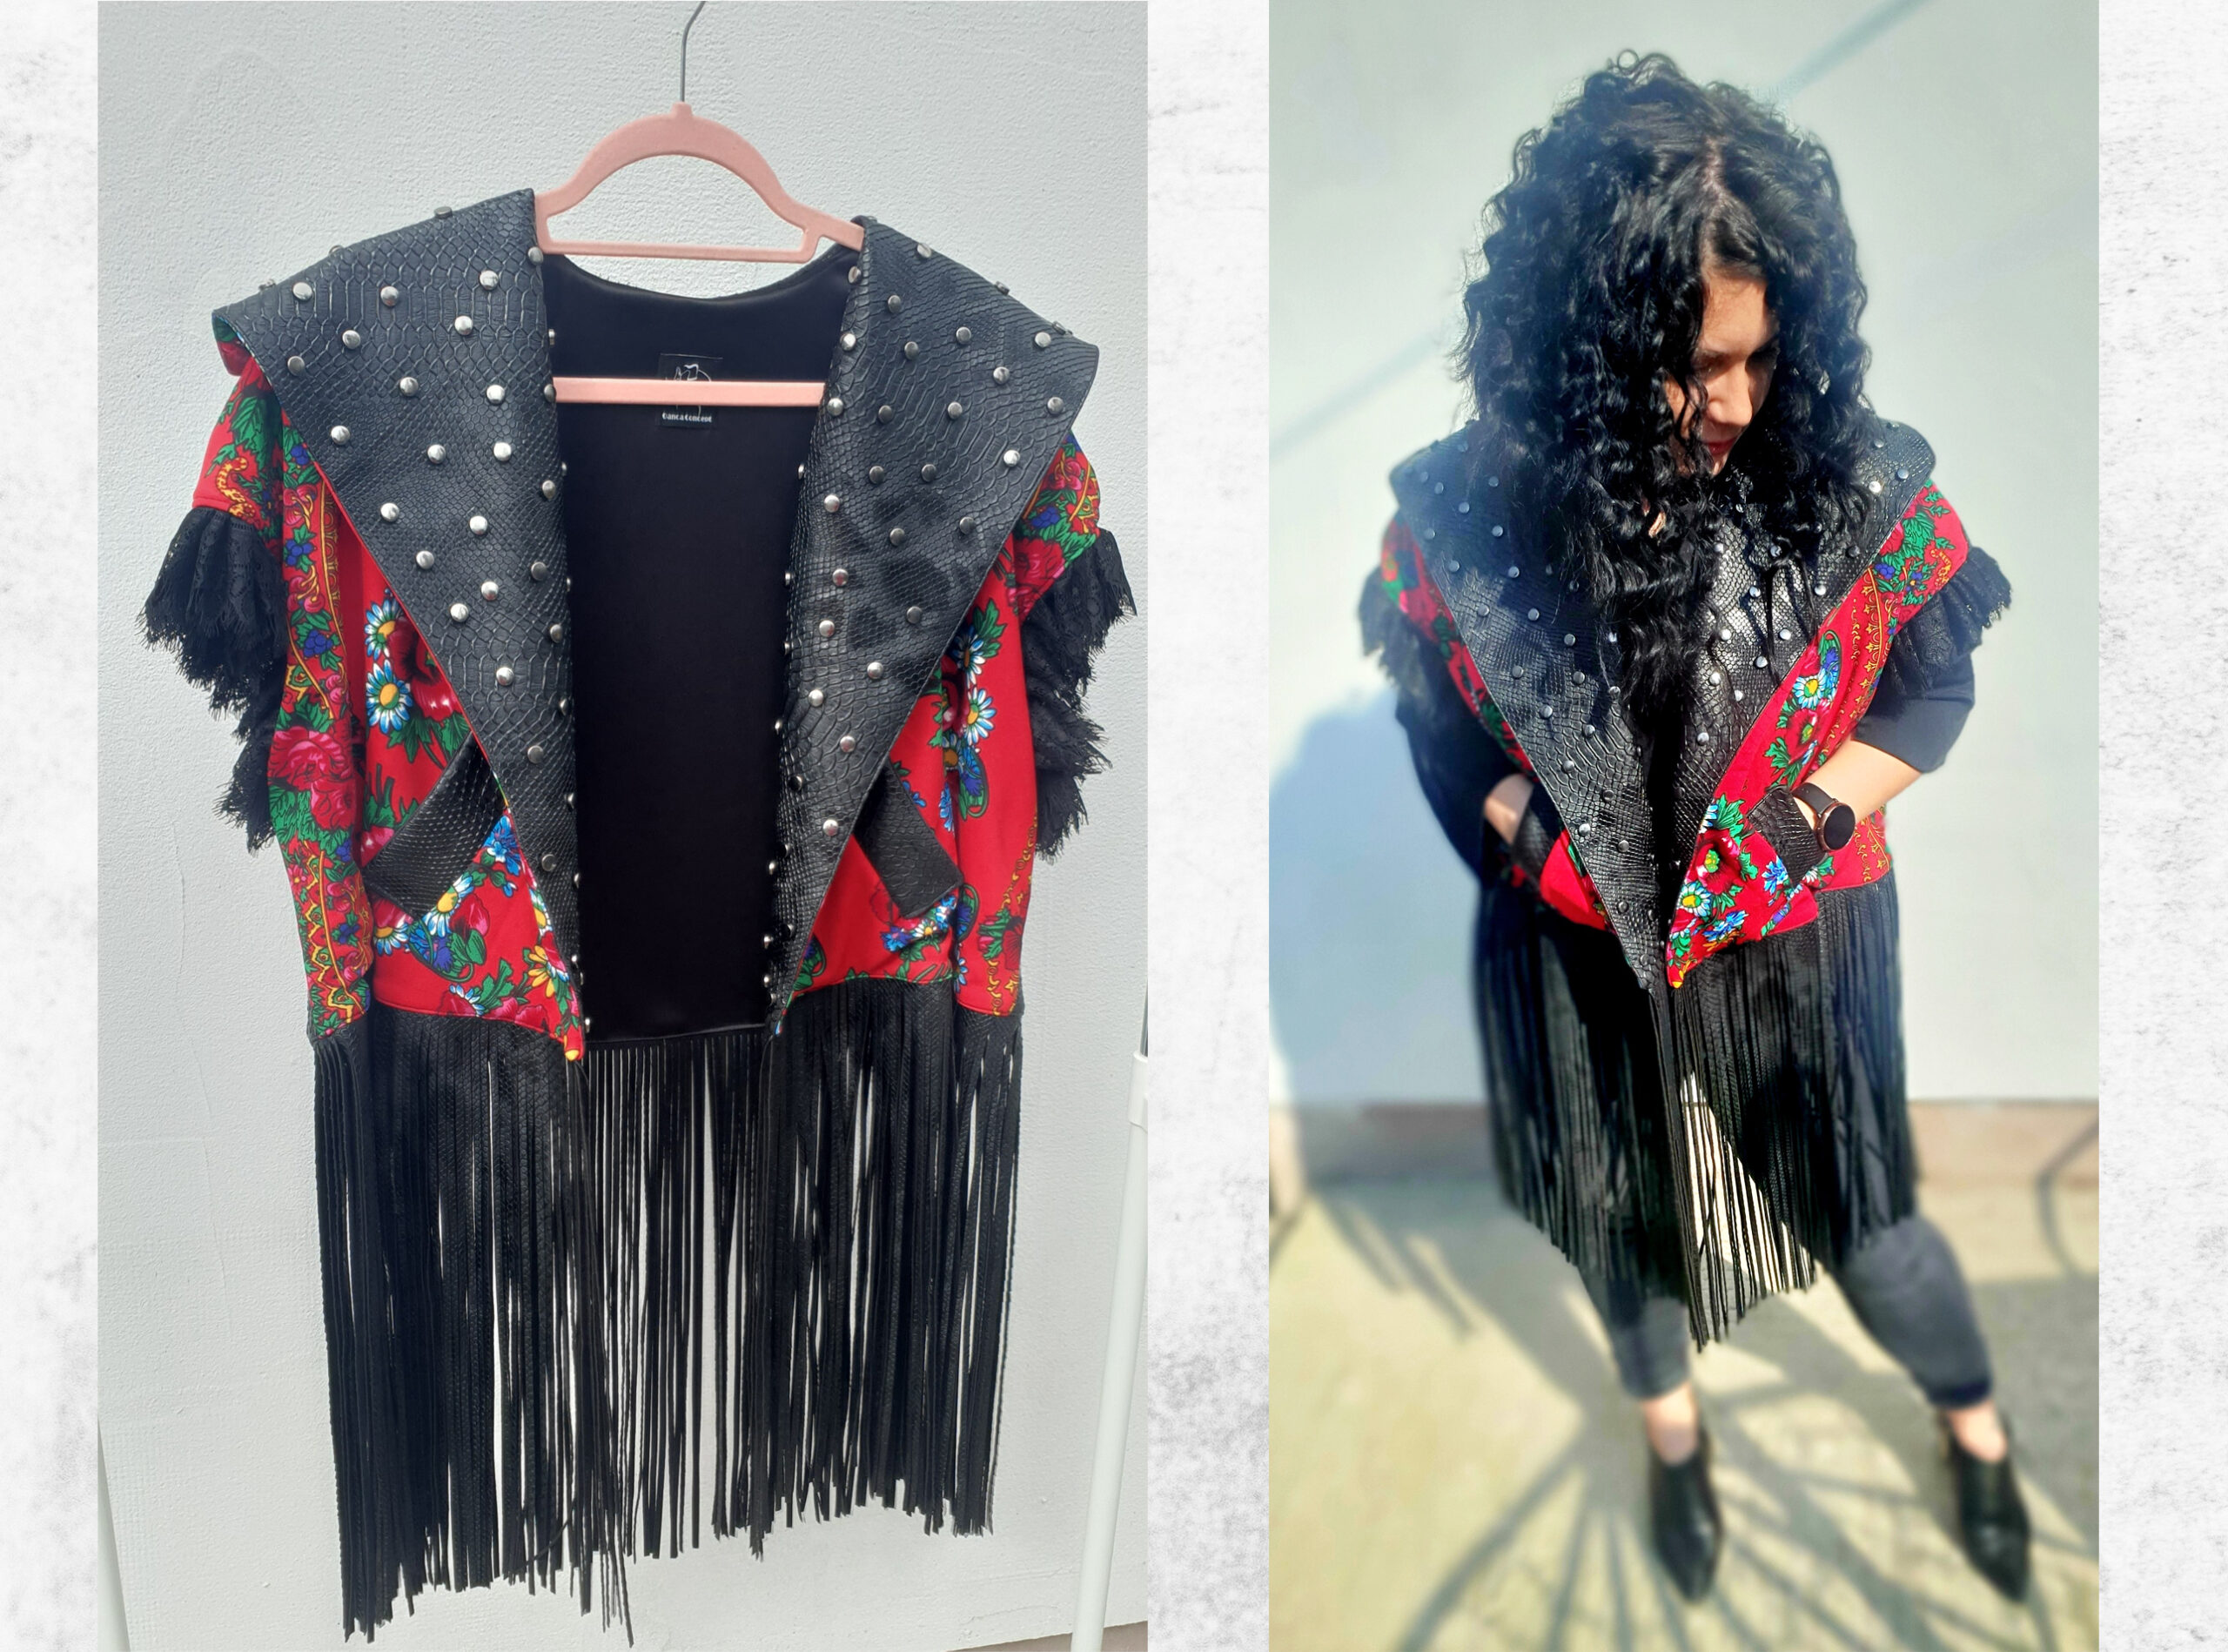 Floral tradiotional gipsy vest with metal stamples, leather and black lace